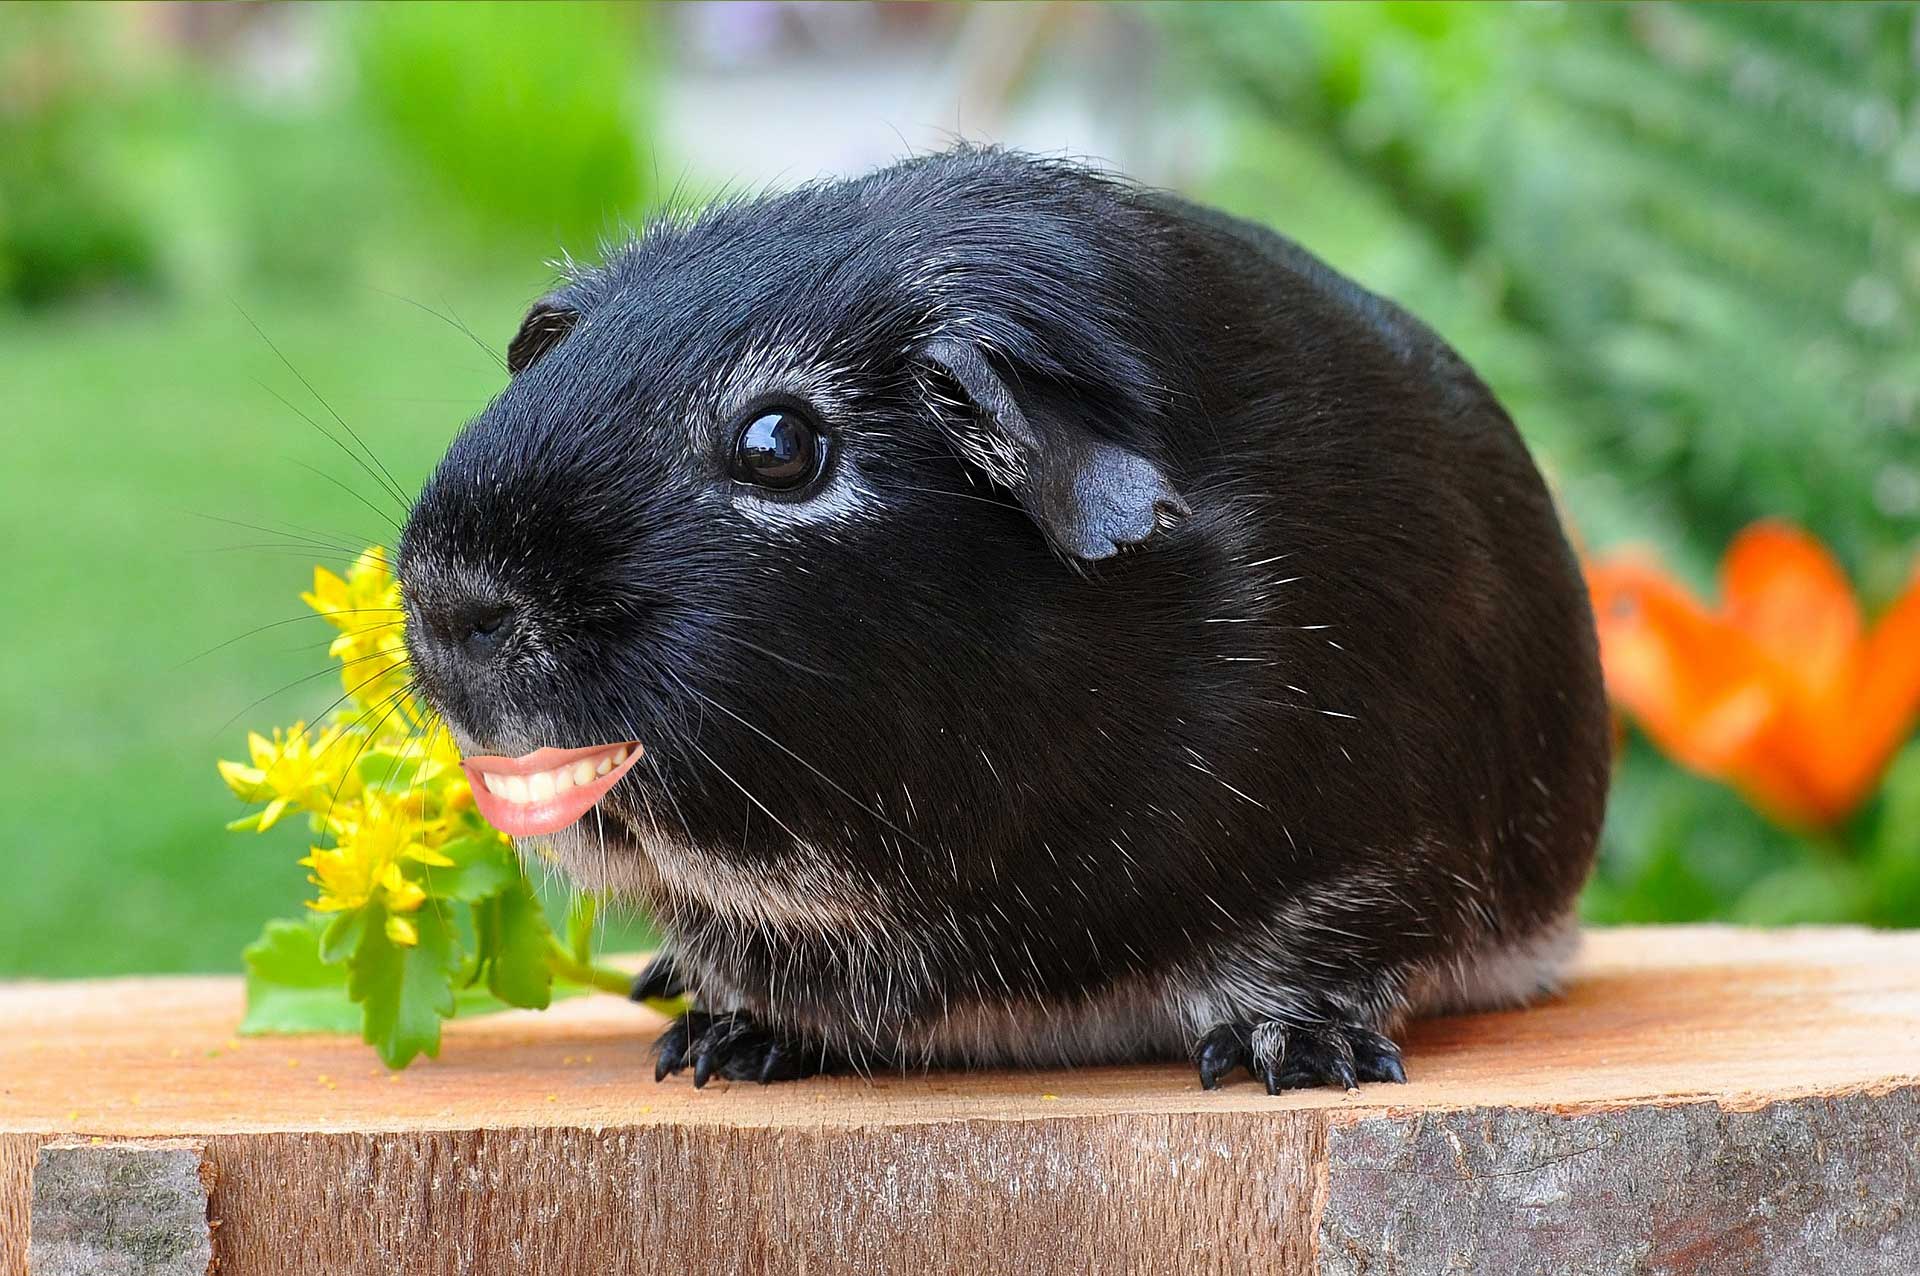 Guinea pig with human mouth